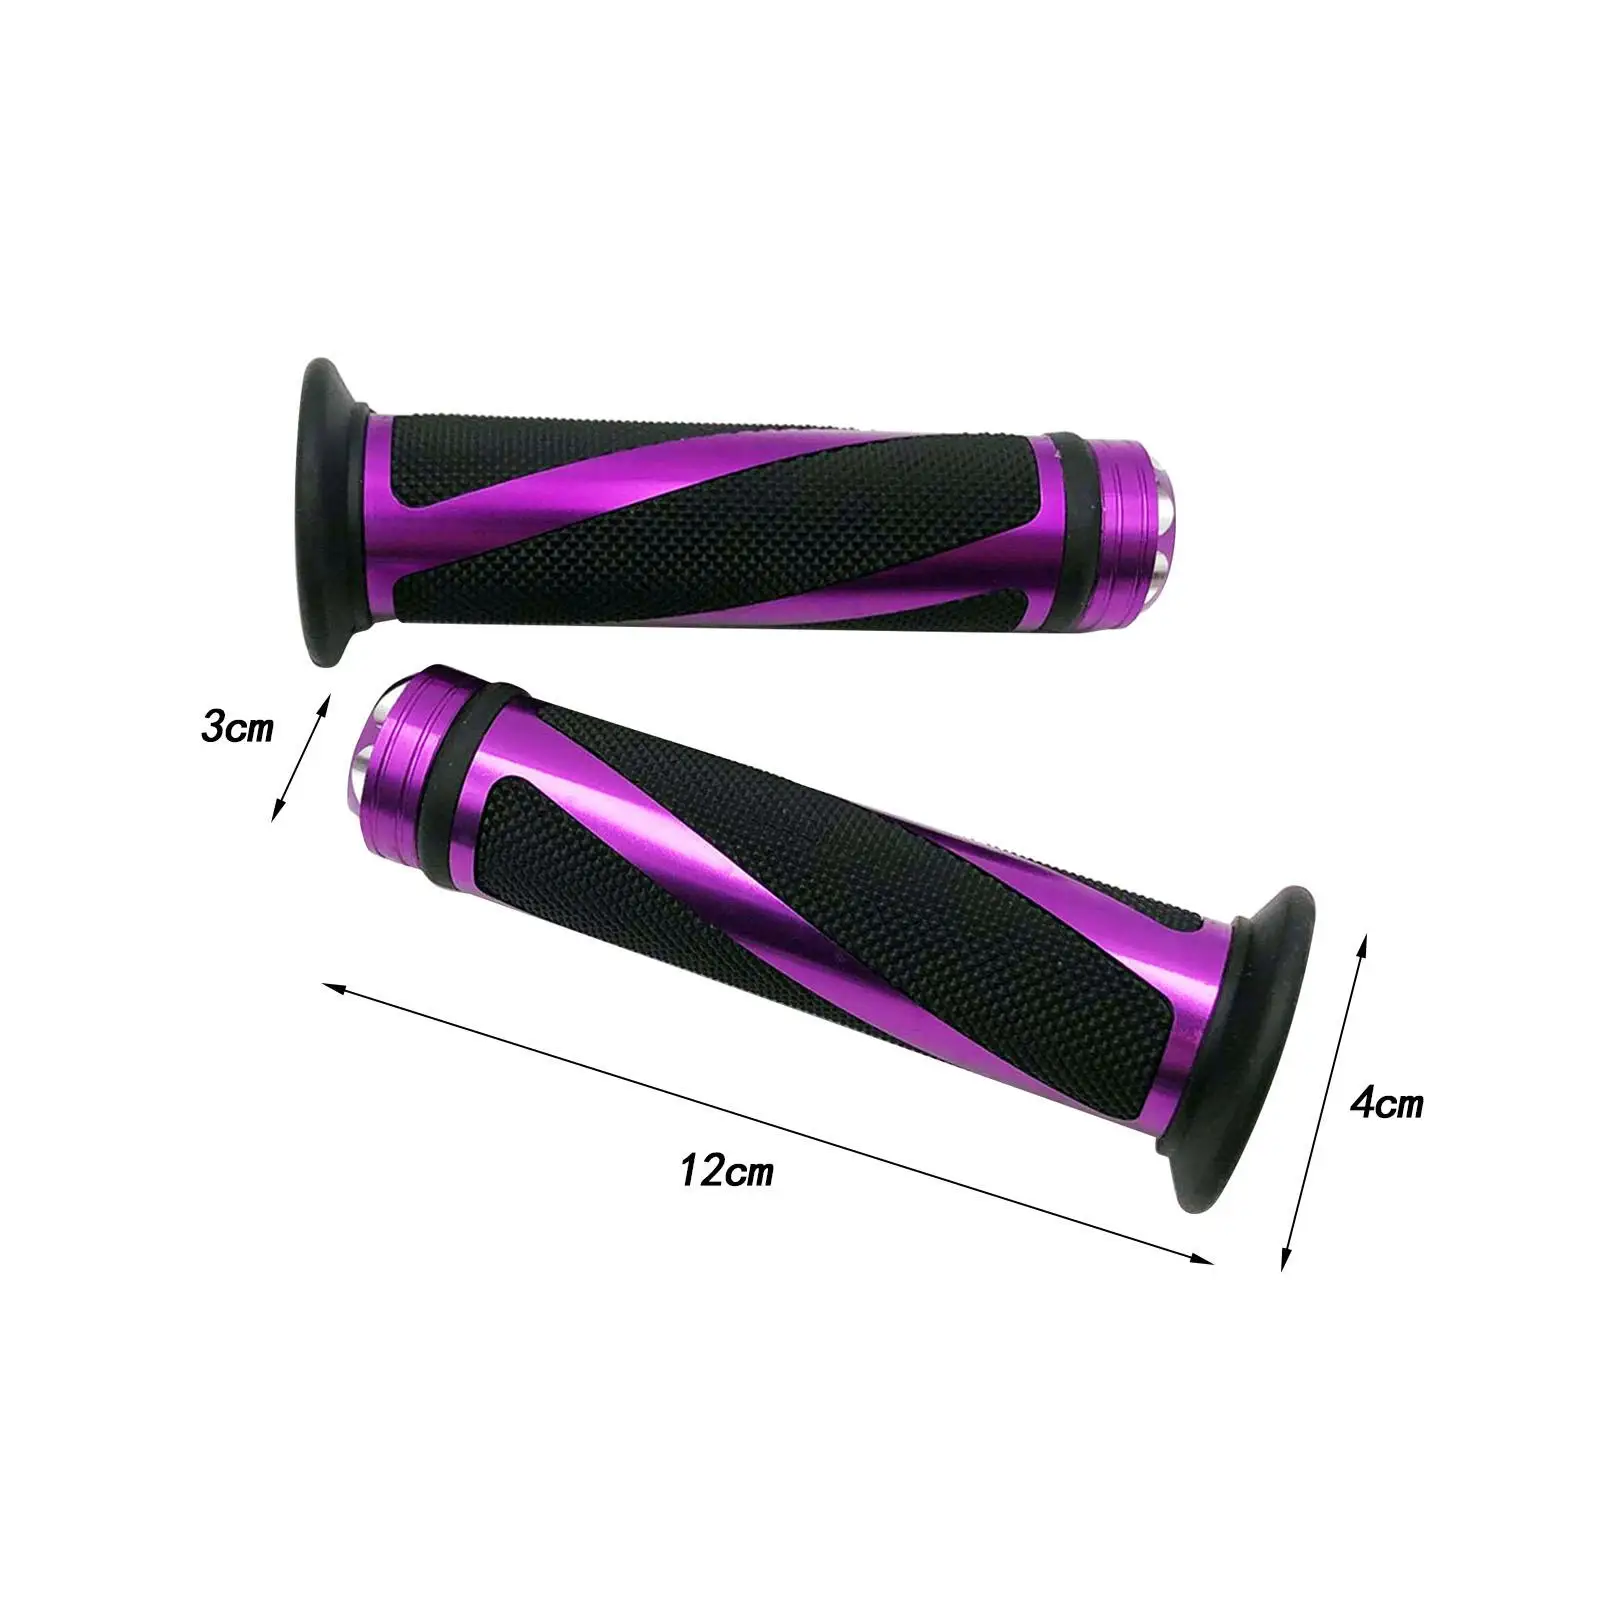 2 Pieces Motorcycle Handlebar Grips Decoration Riding Rubber for Yamaha